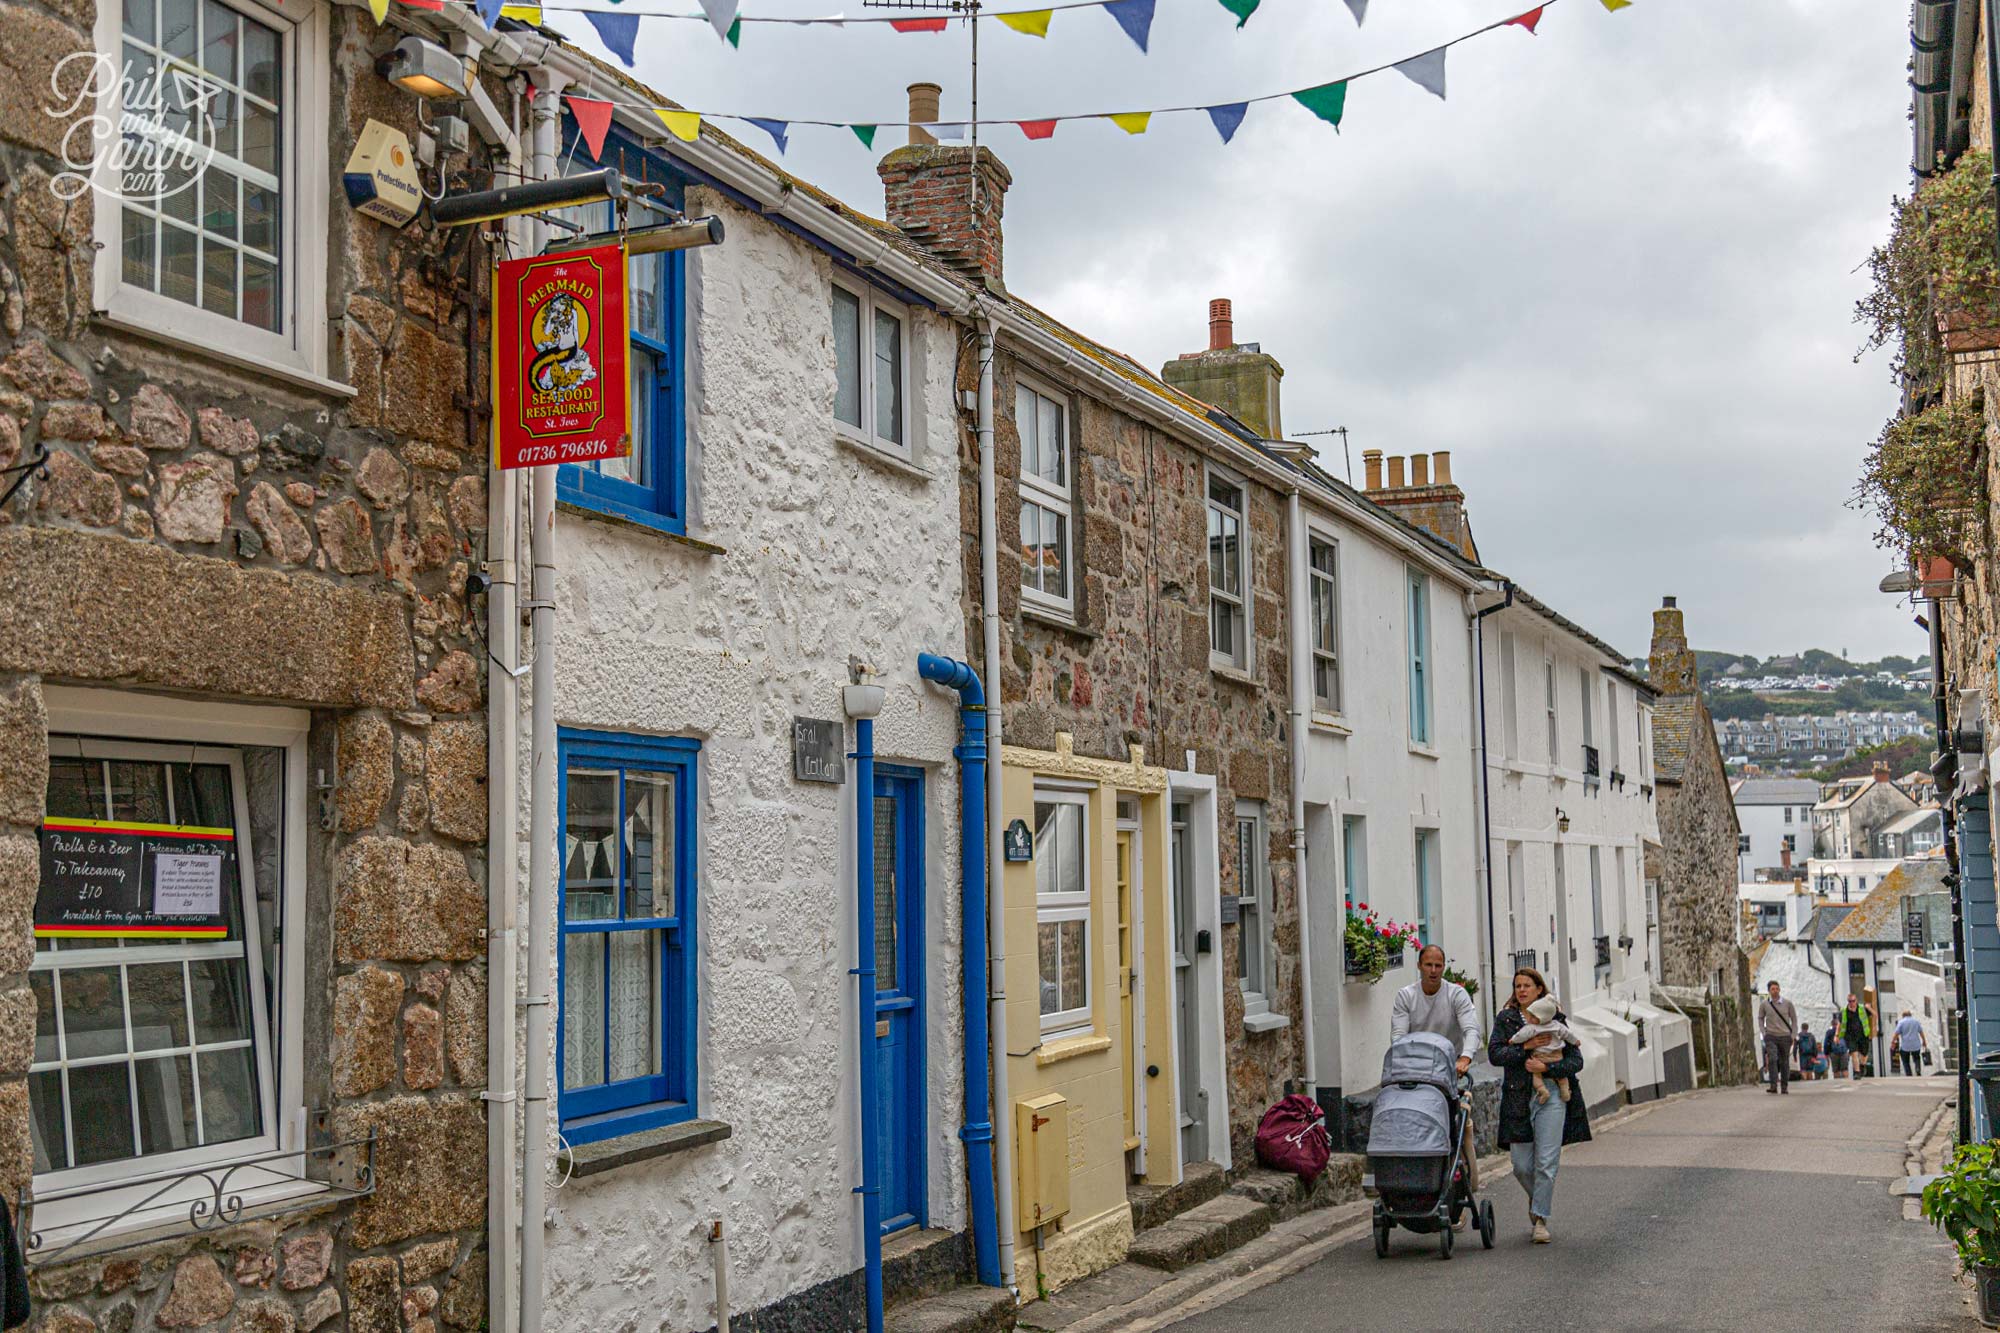 Lots of narrow streets lined with old fishermen's cottages to explore